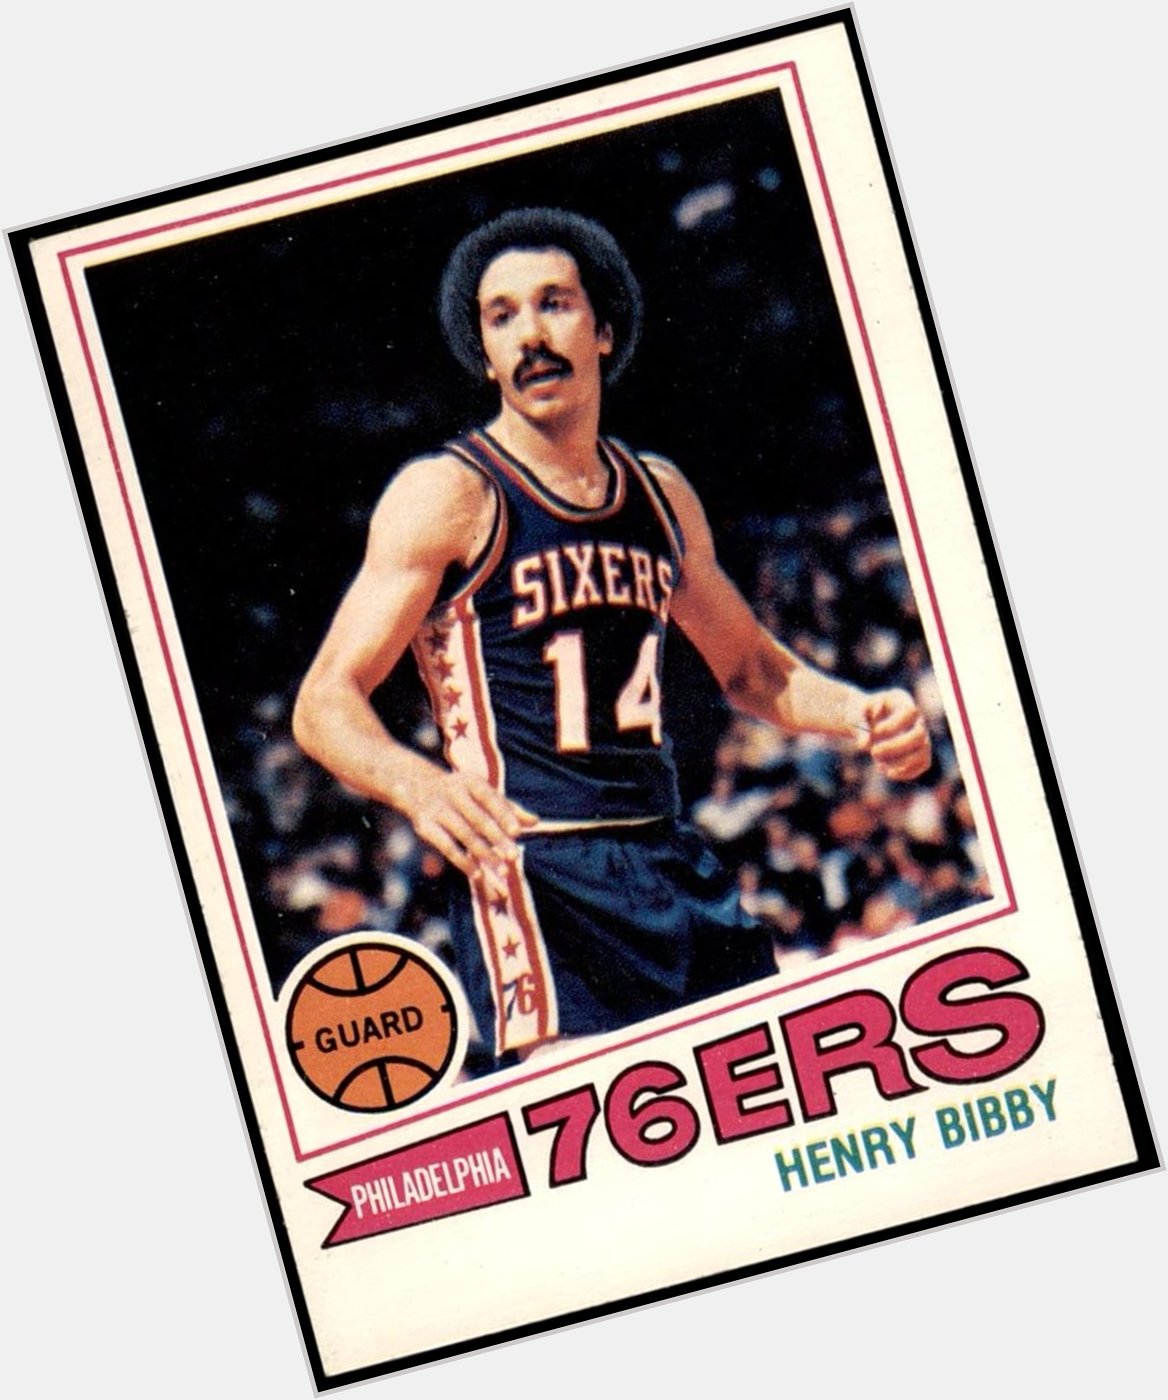 Happy 72d Birthday to Henry Bibby, point guard on the 1976-77 